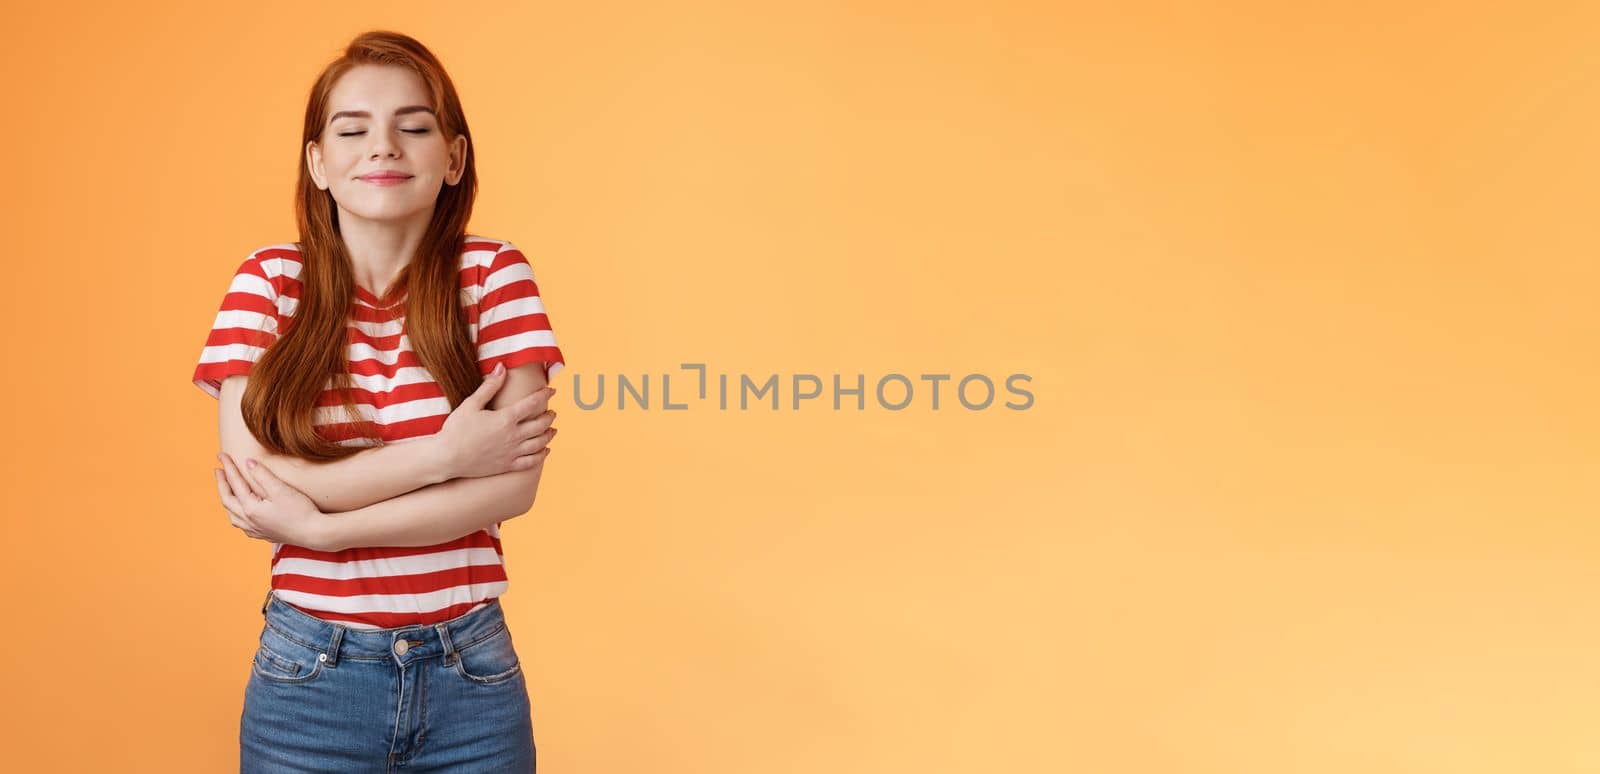 Tender lovely redhead modern woman embrace own body, feel happiness self-acceptance, smiling close eyes, cross arms, hugging herself dreamy, imaging something, daydreaming orange background.